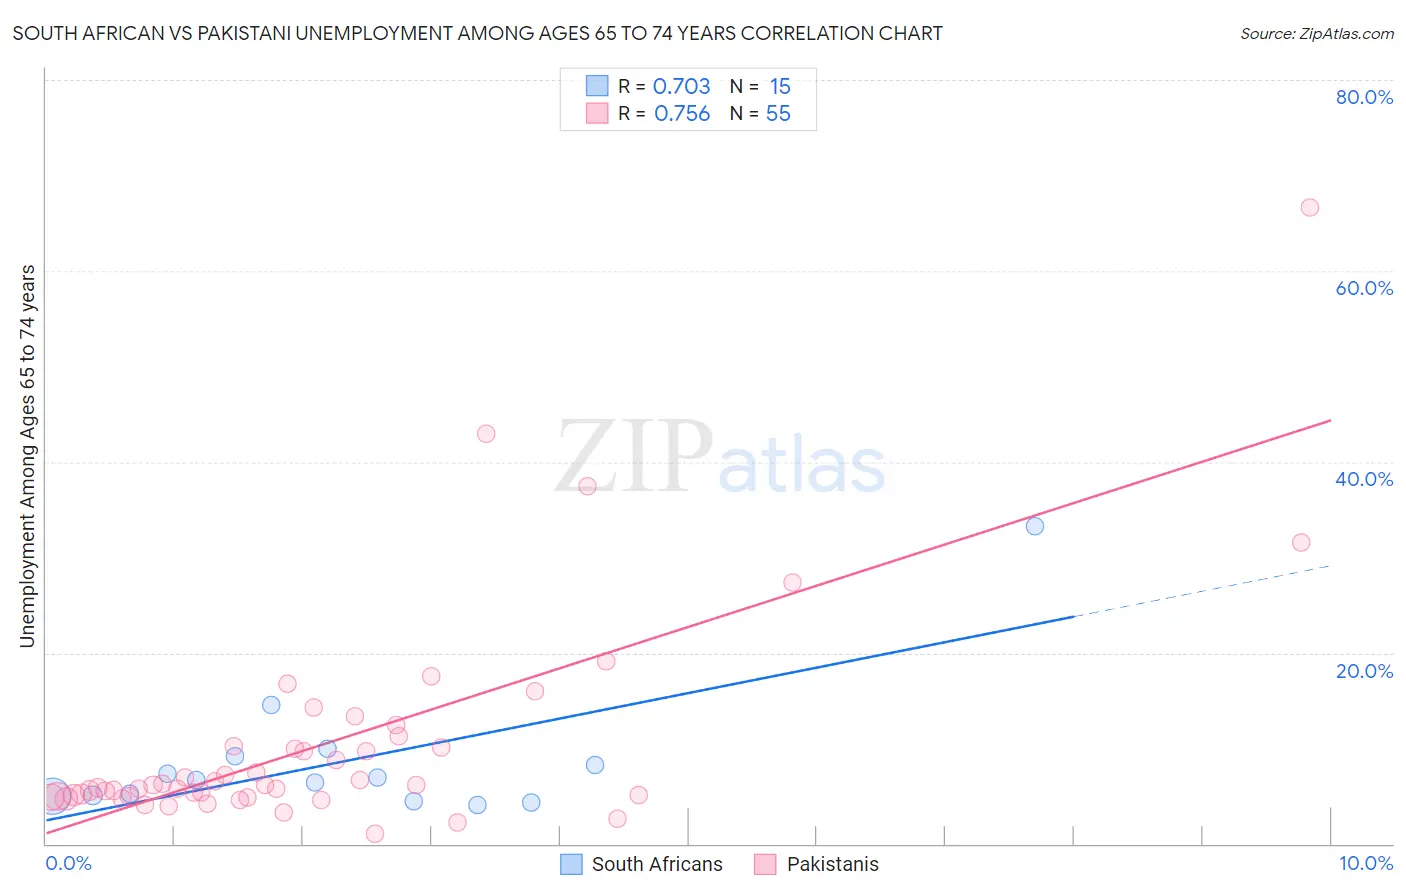 South African vs Pakistani Unemployment Among Ages 65 to 74 years